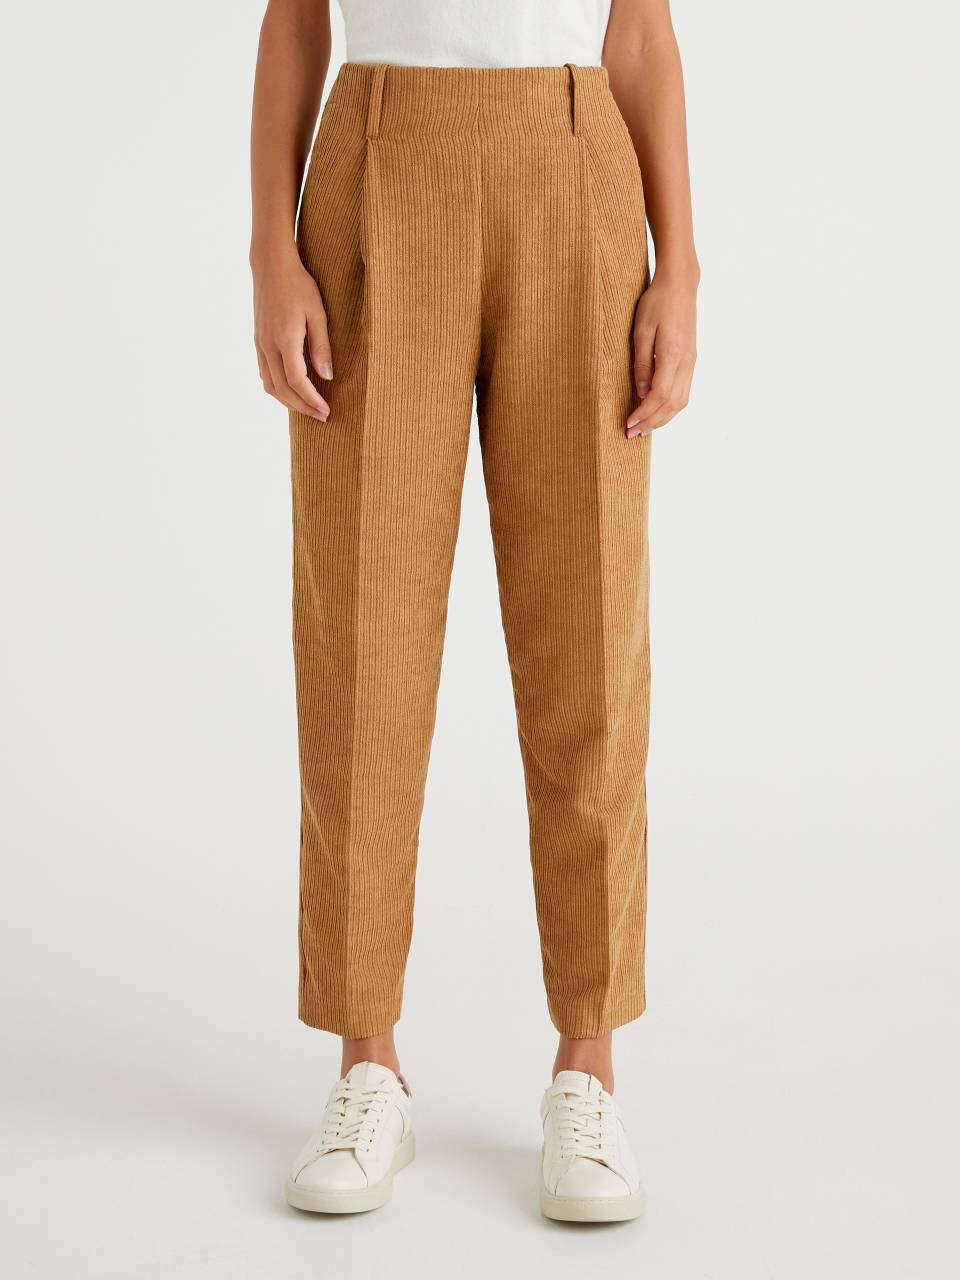 Cropped Corduroy Trousers  Pink  ARKET  Trousers women Pink trousers  Trousers